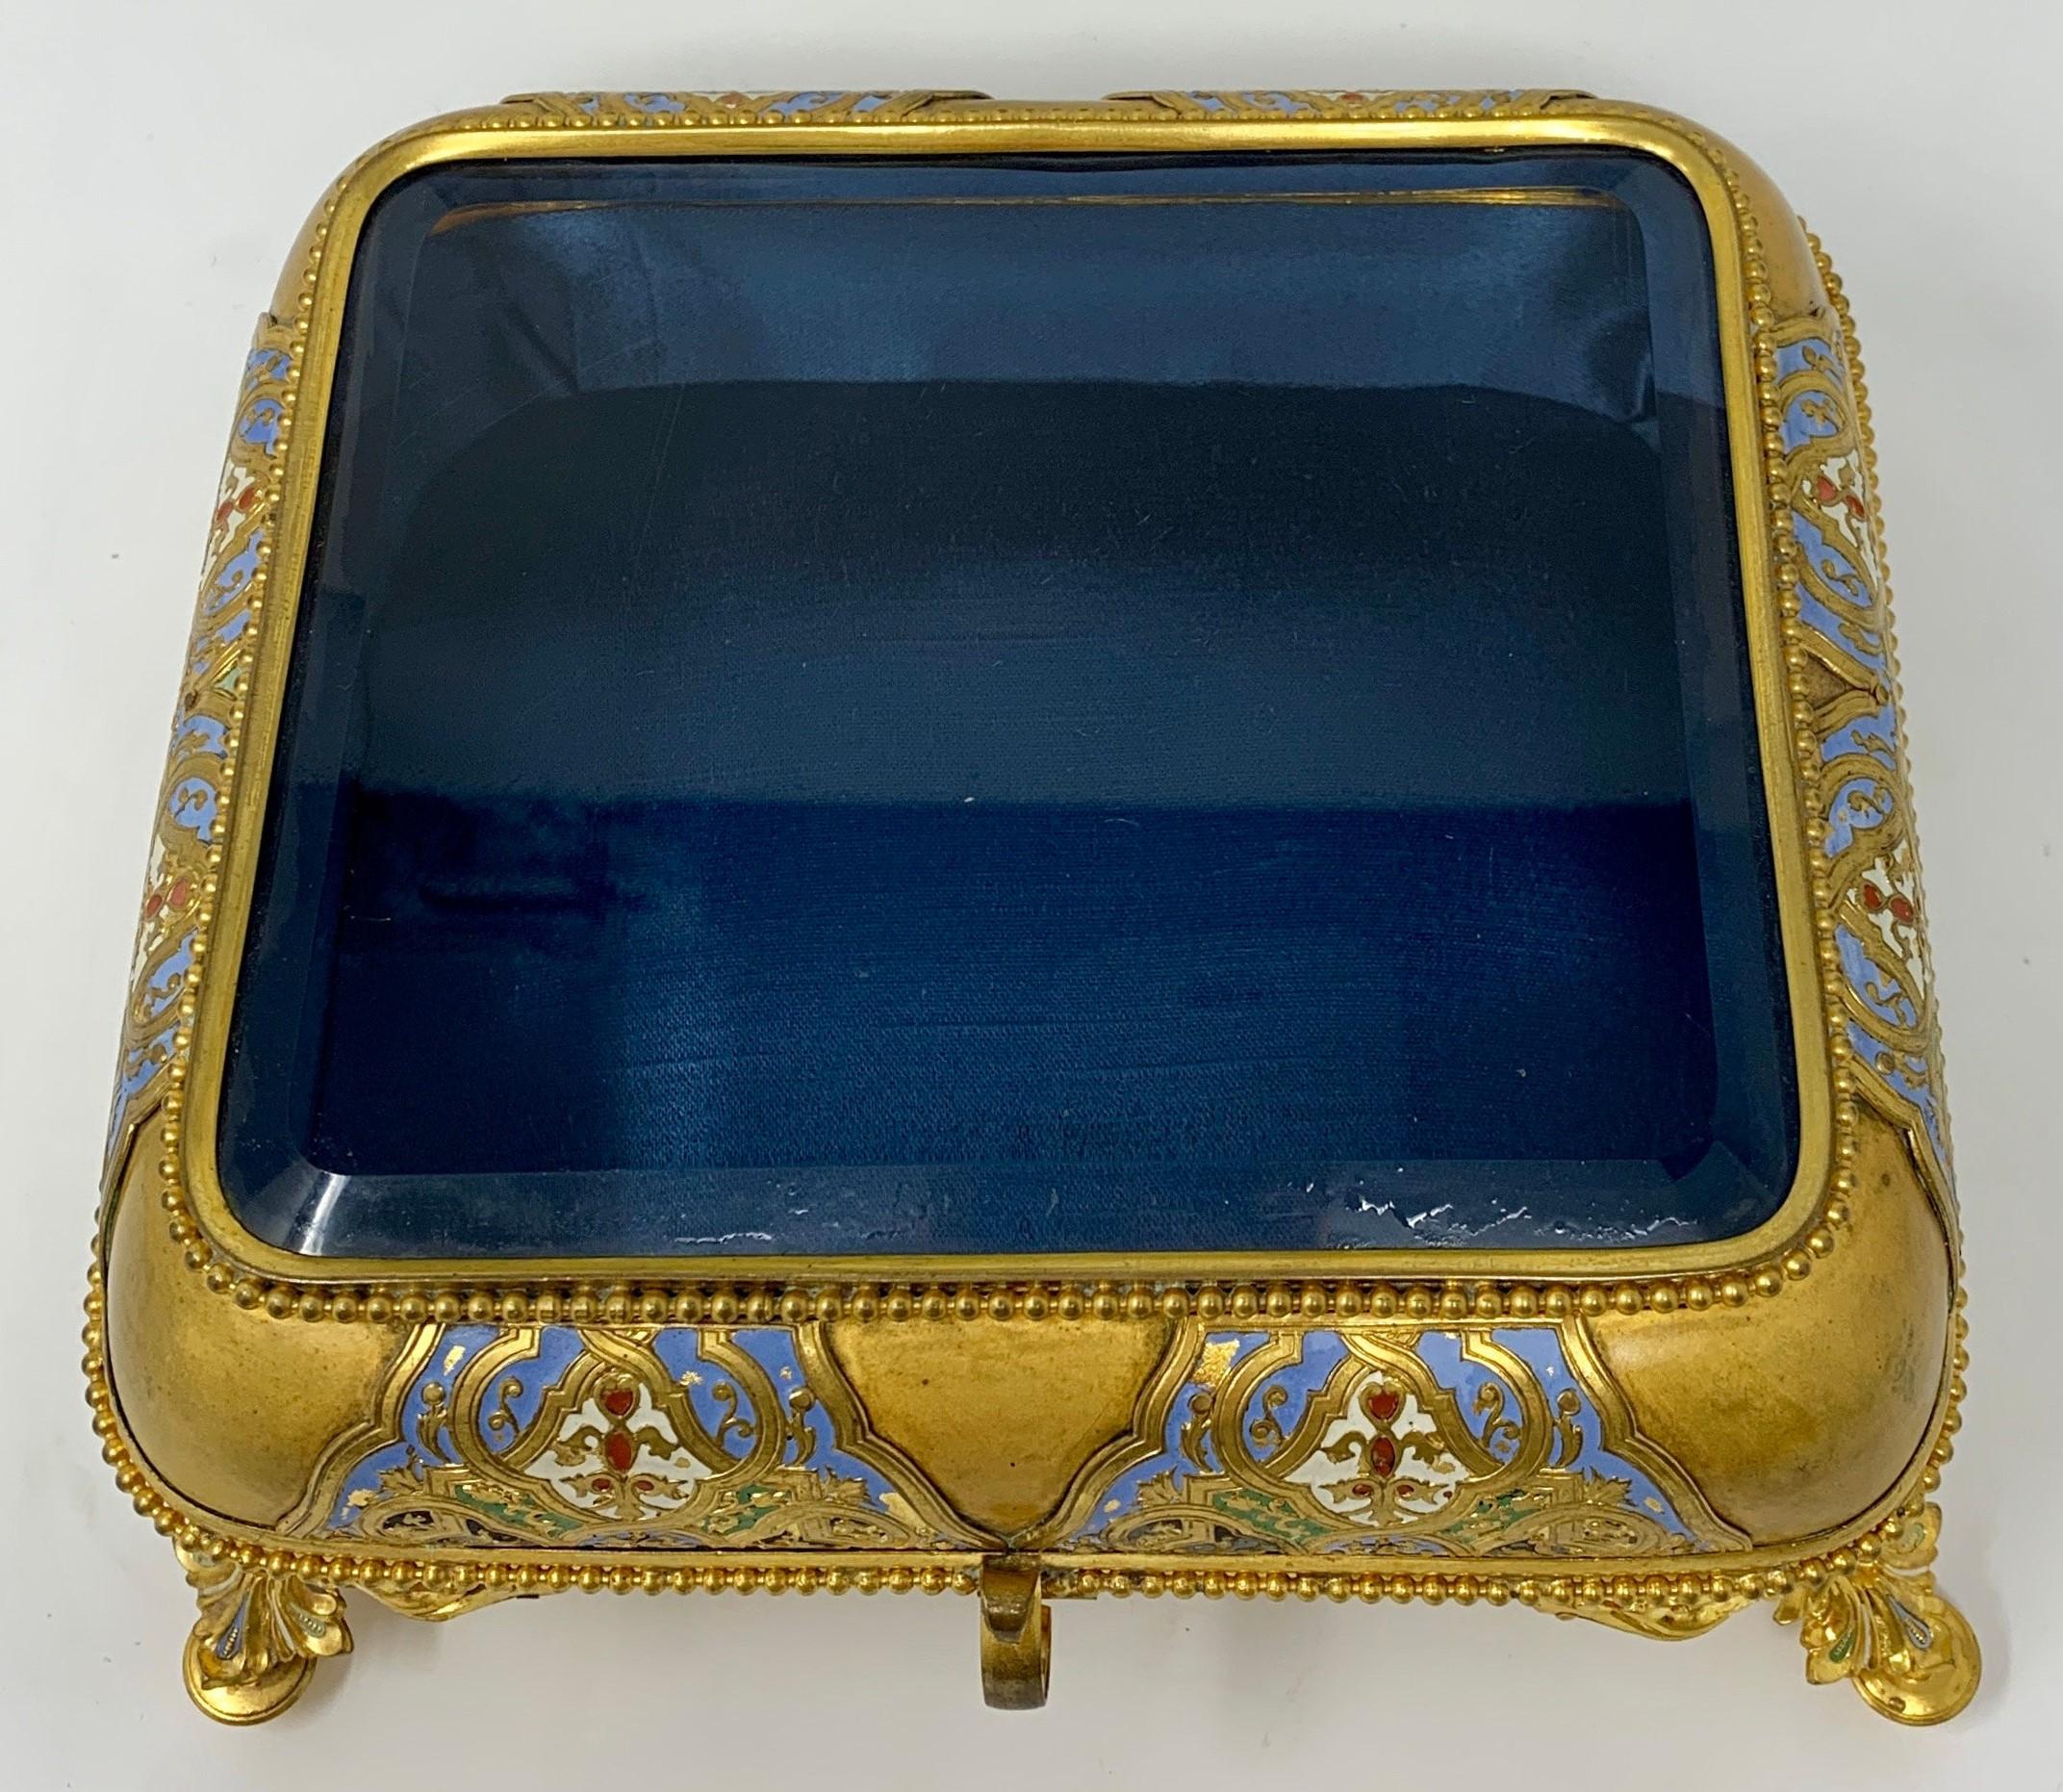 Antique French Napoleon III ormolu and cloisonné jewel box. Just a little charmer.
 